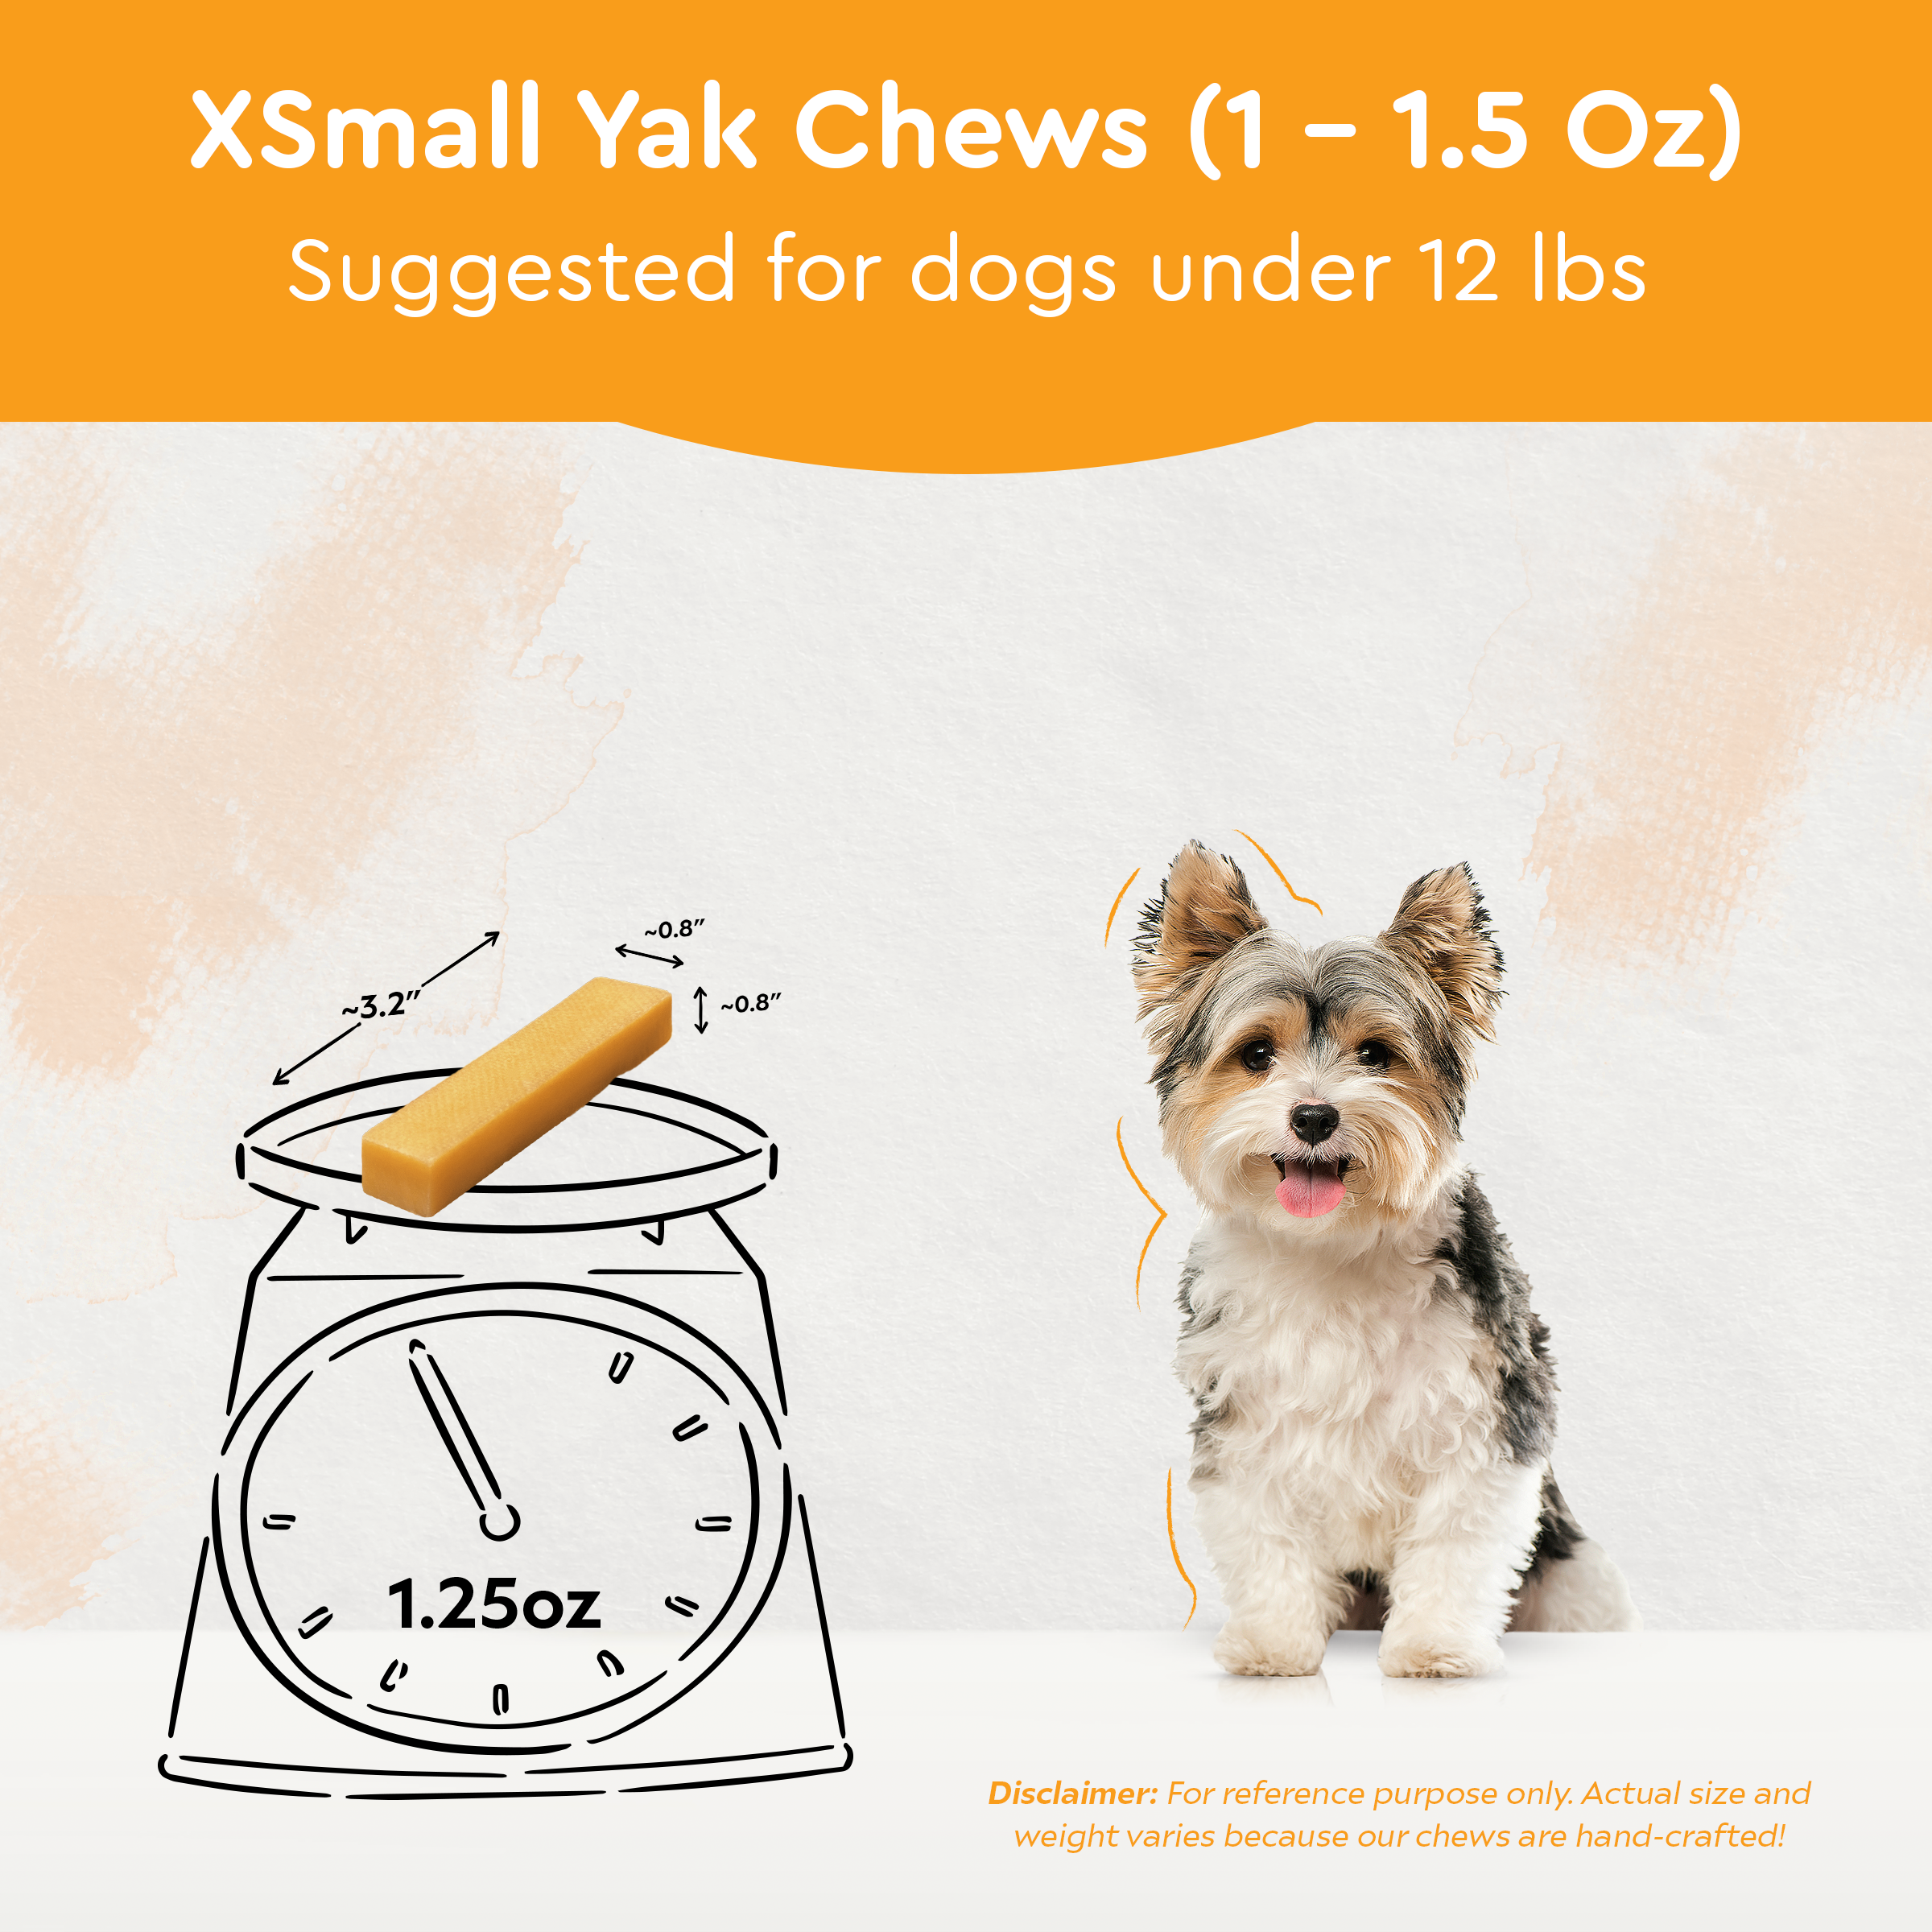 xSMALL YAKS/Best for dogs under 12 lbs